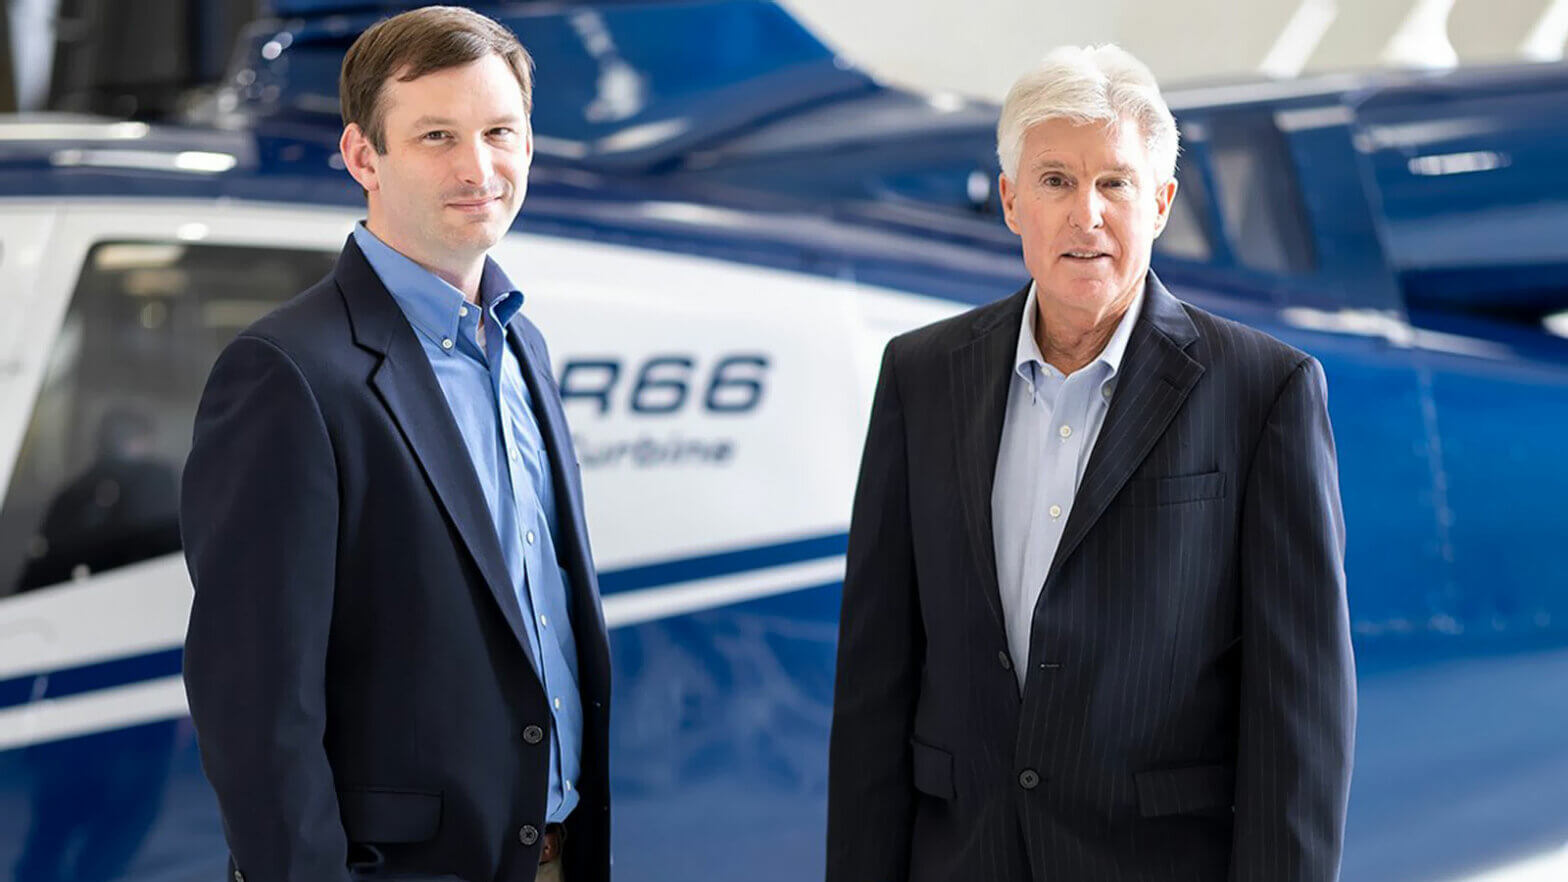 David Smith named CEO of Robinson Helicopter as company eyes future growth